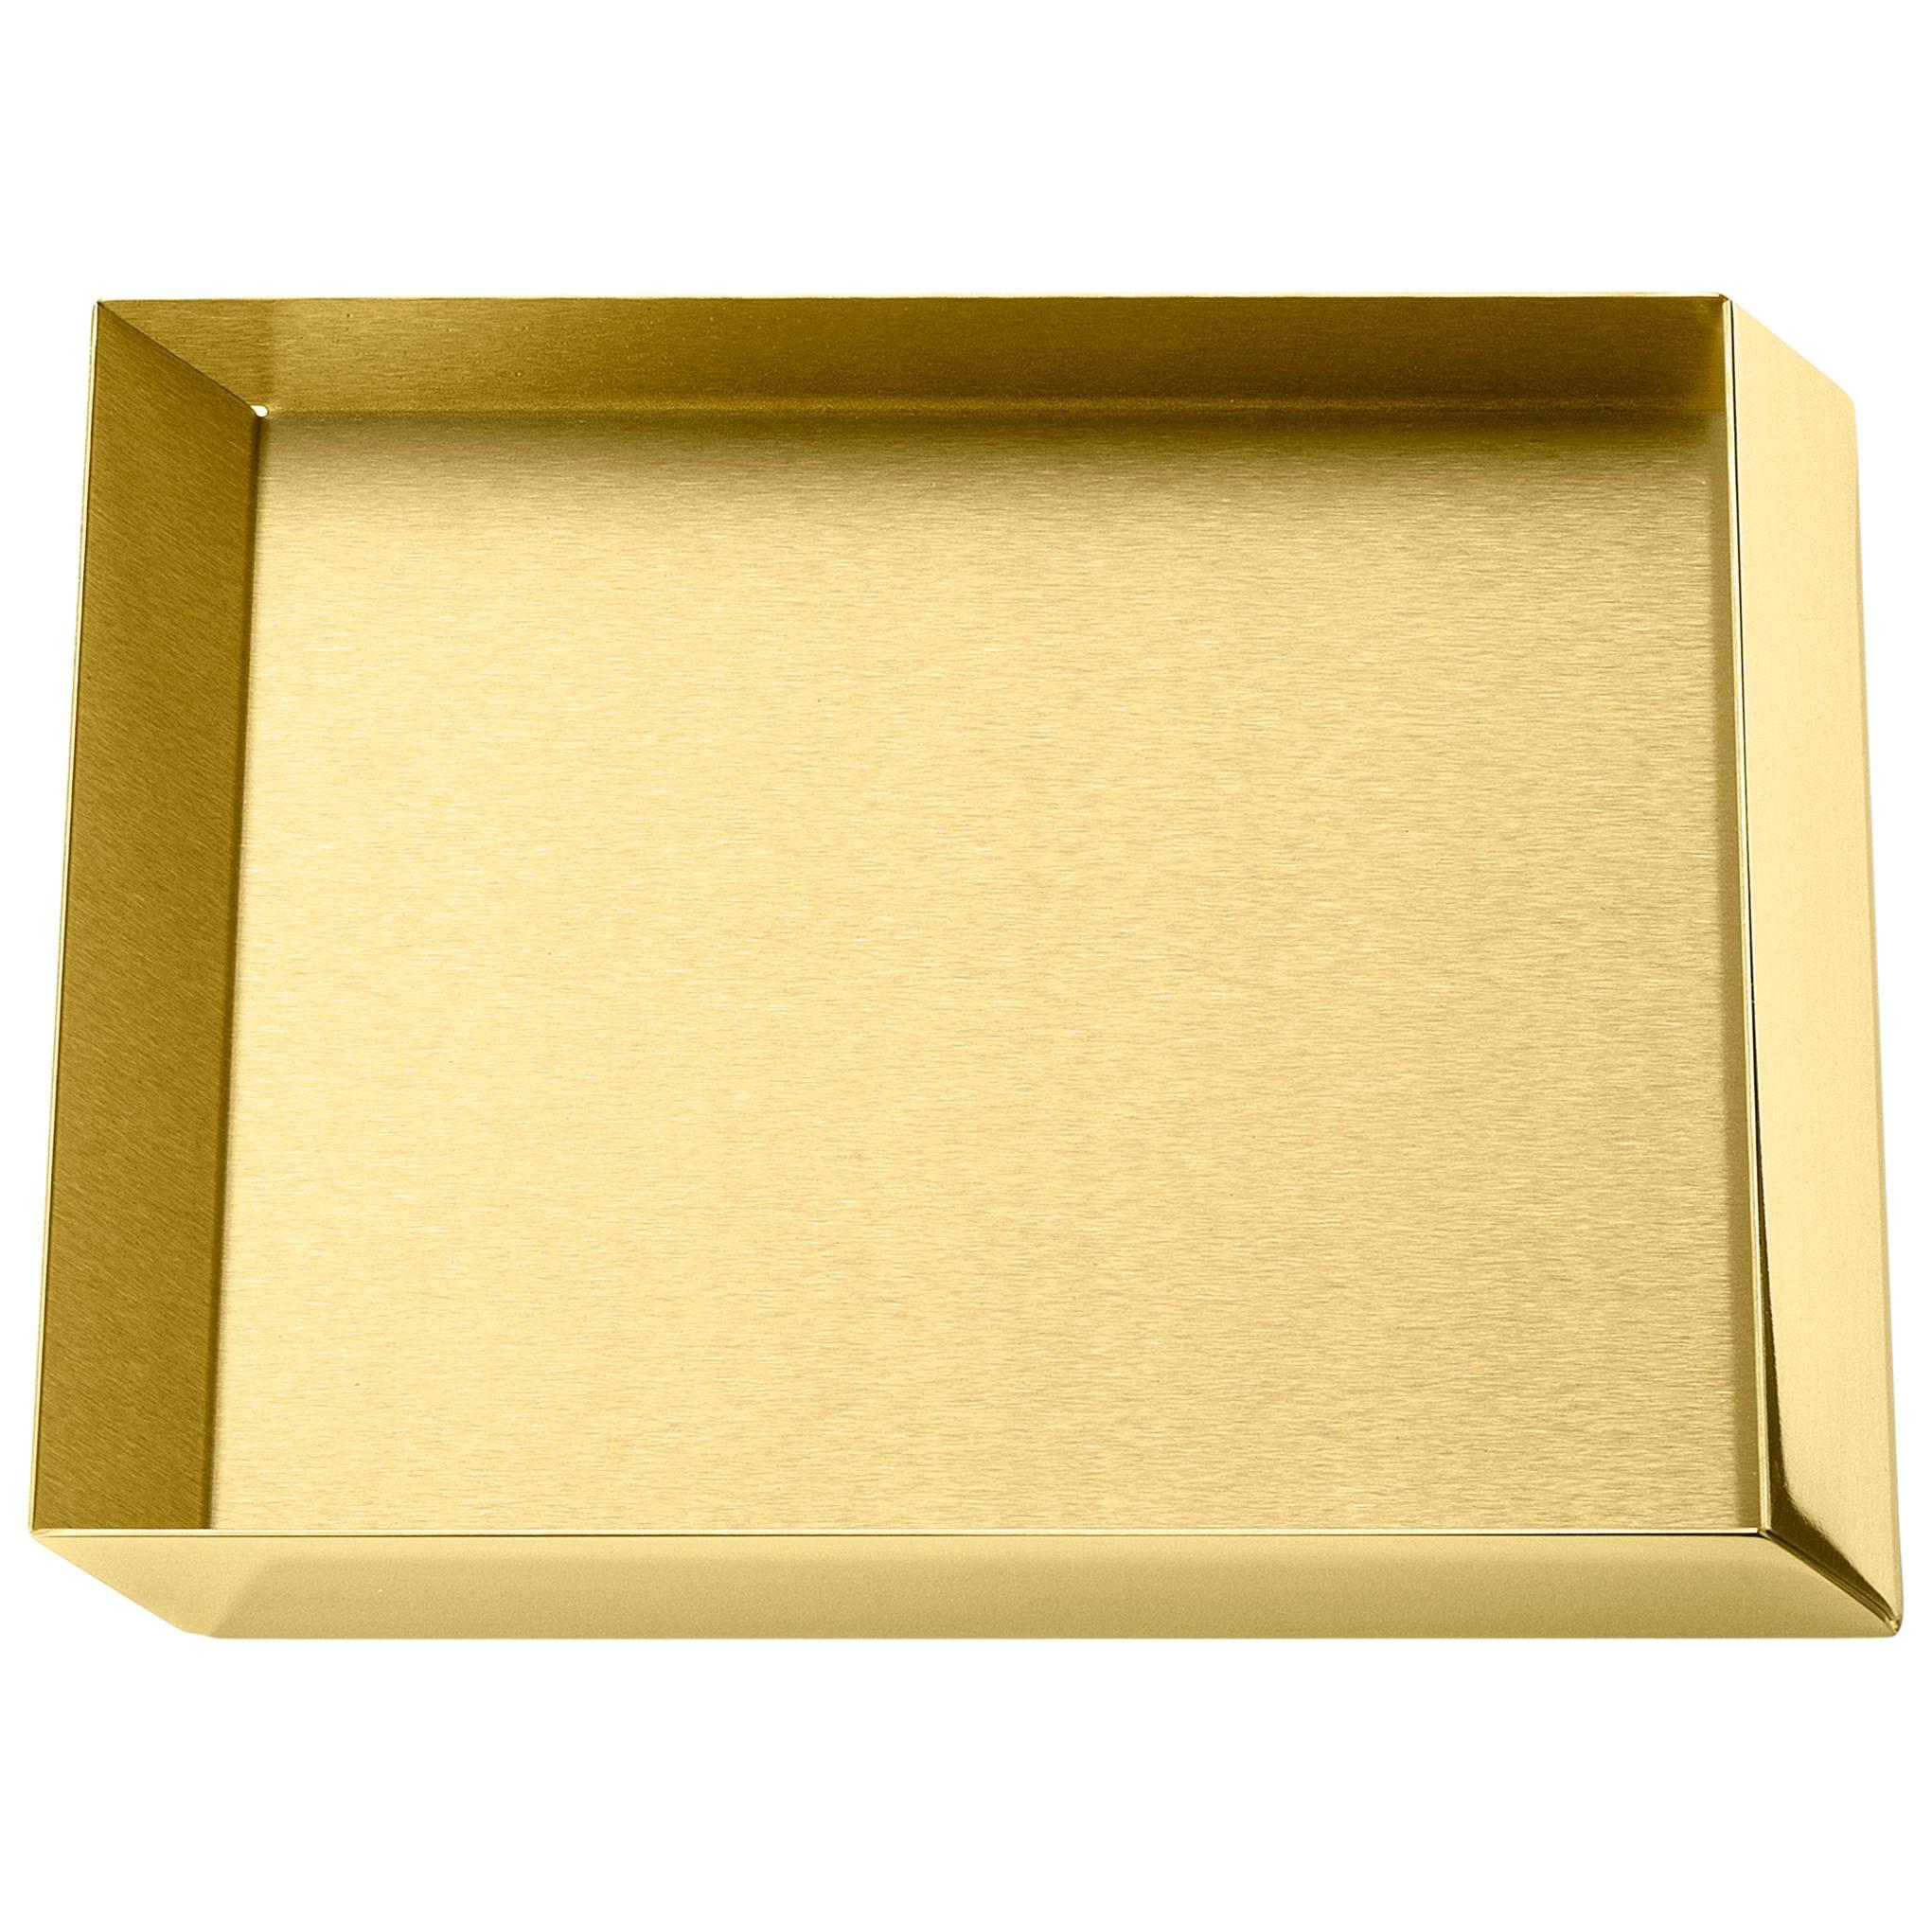 Ghidini 1961 Axonometry Squared Small Tray in Polished Brass